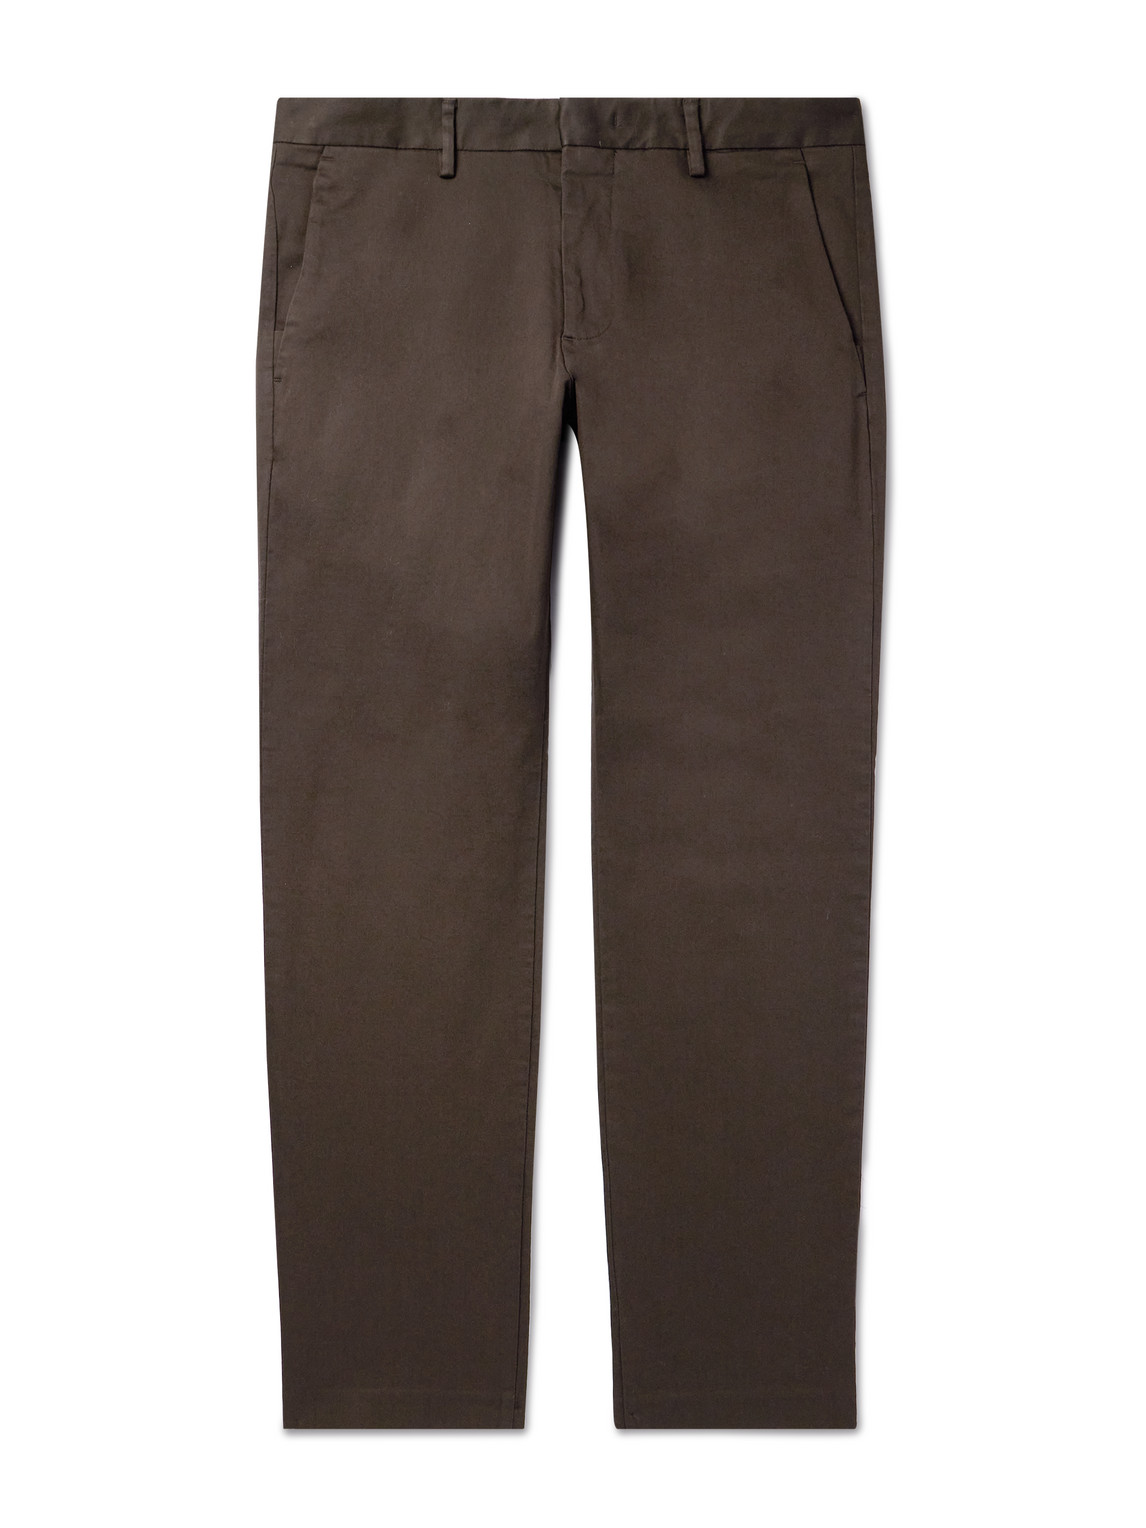 Theo 1420 Tapered Organic Cotton-Blend Twill Chinos